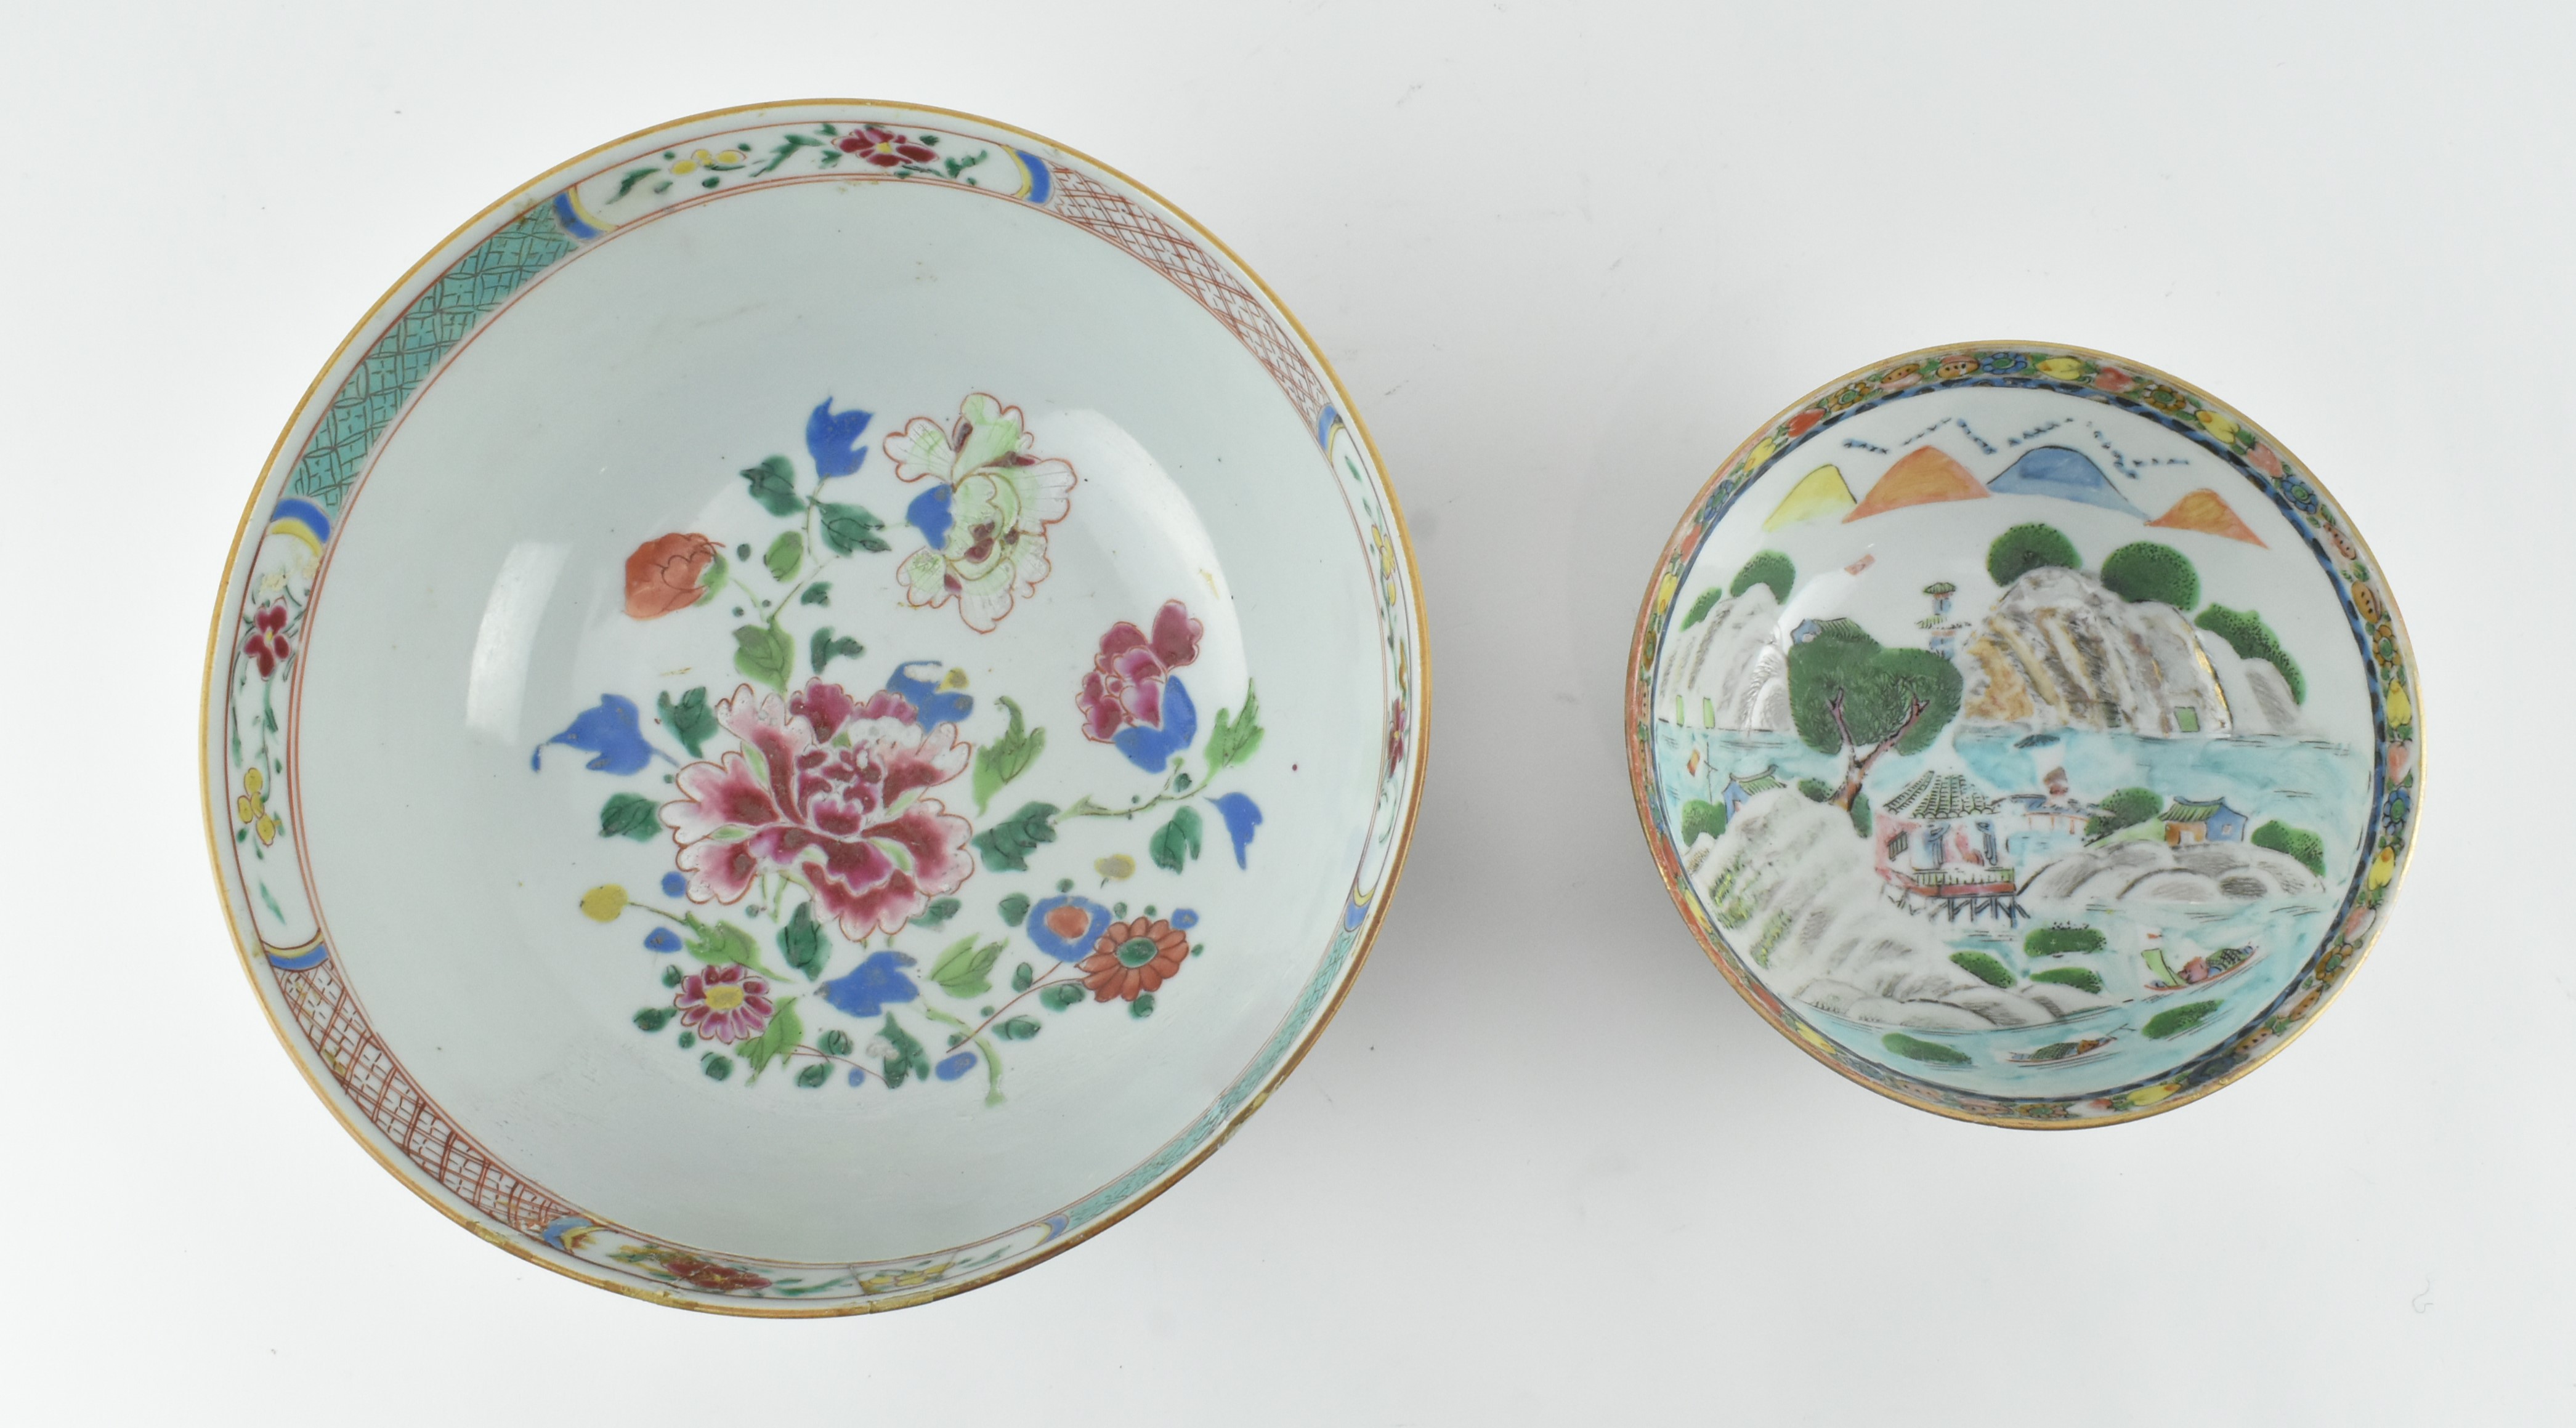 TWO QING DYNASTY FAMILLE ROSE BOWLS 清 粉彩碗 - Image 3 of 6